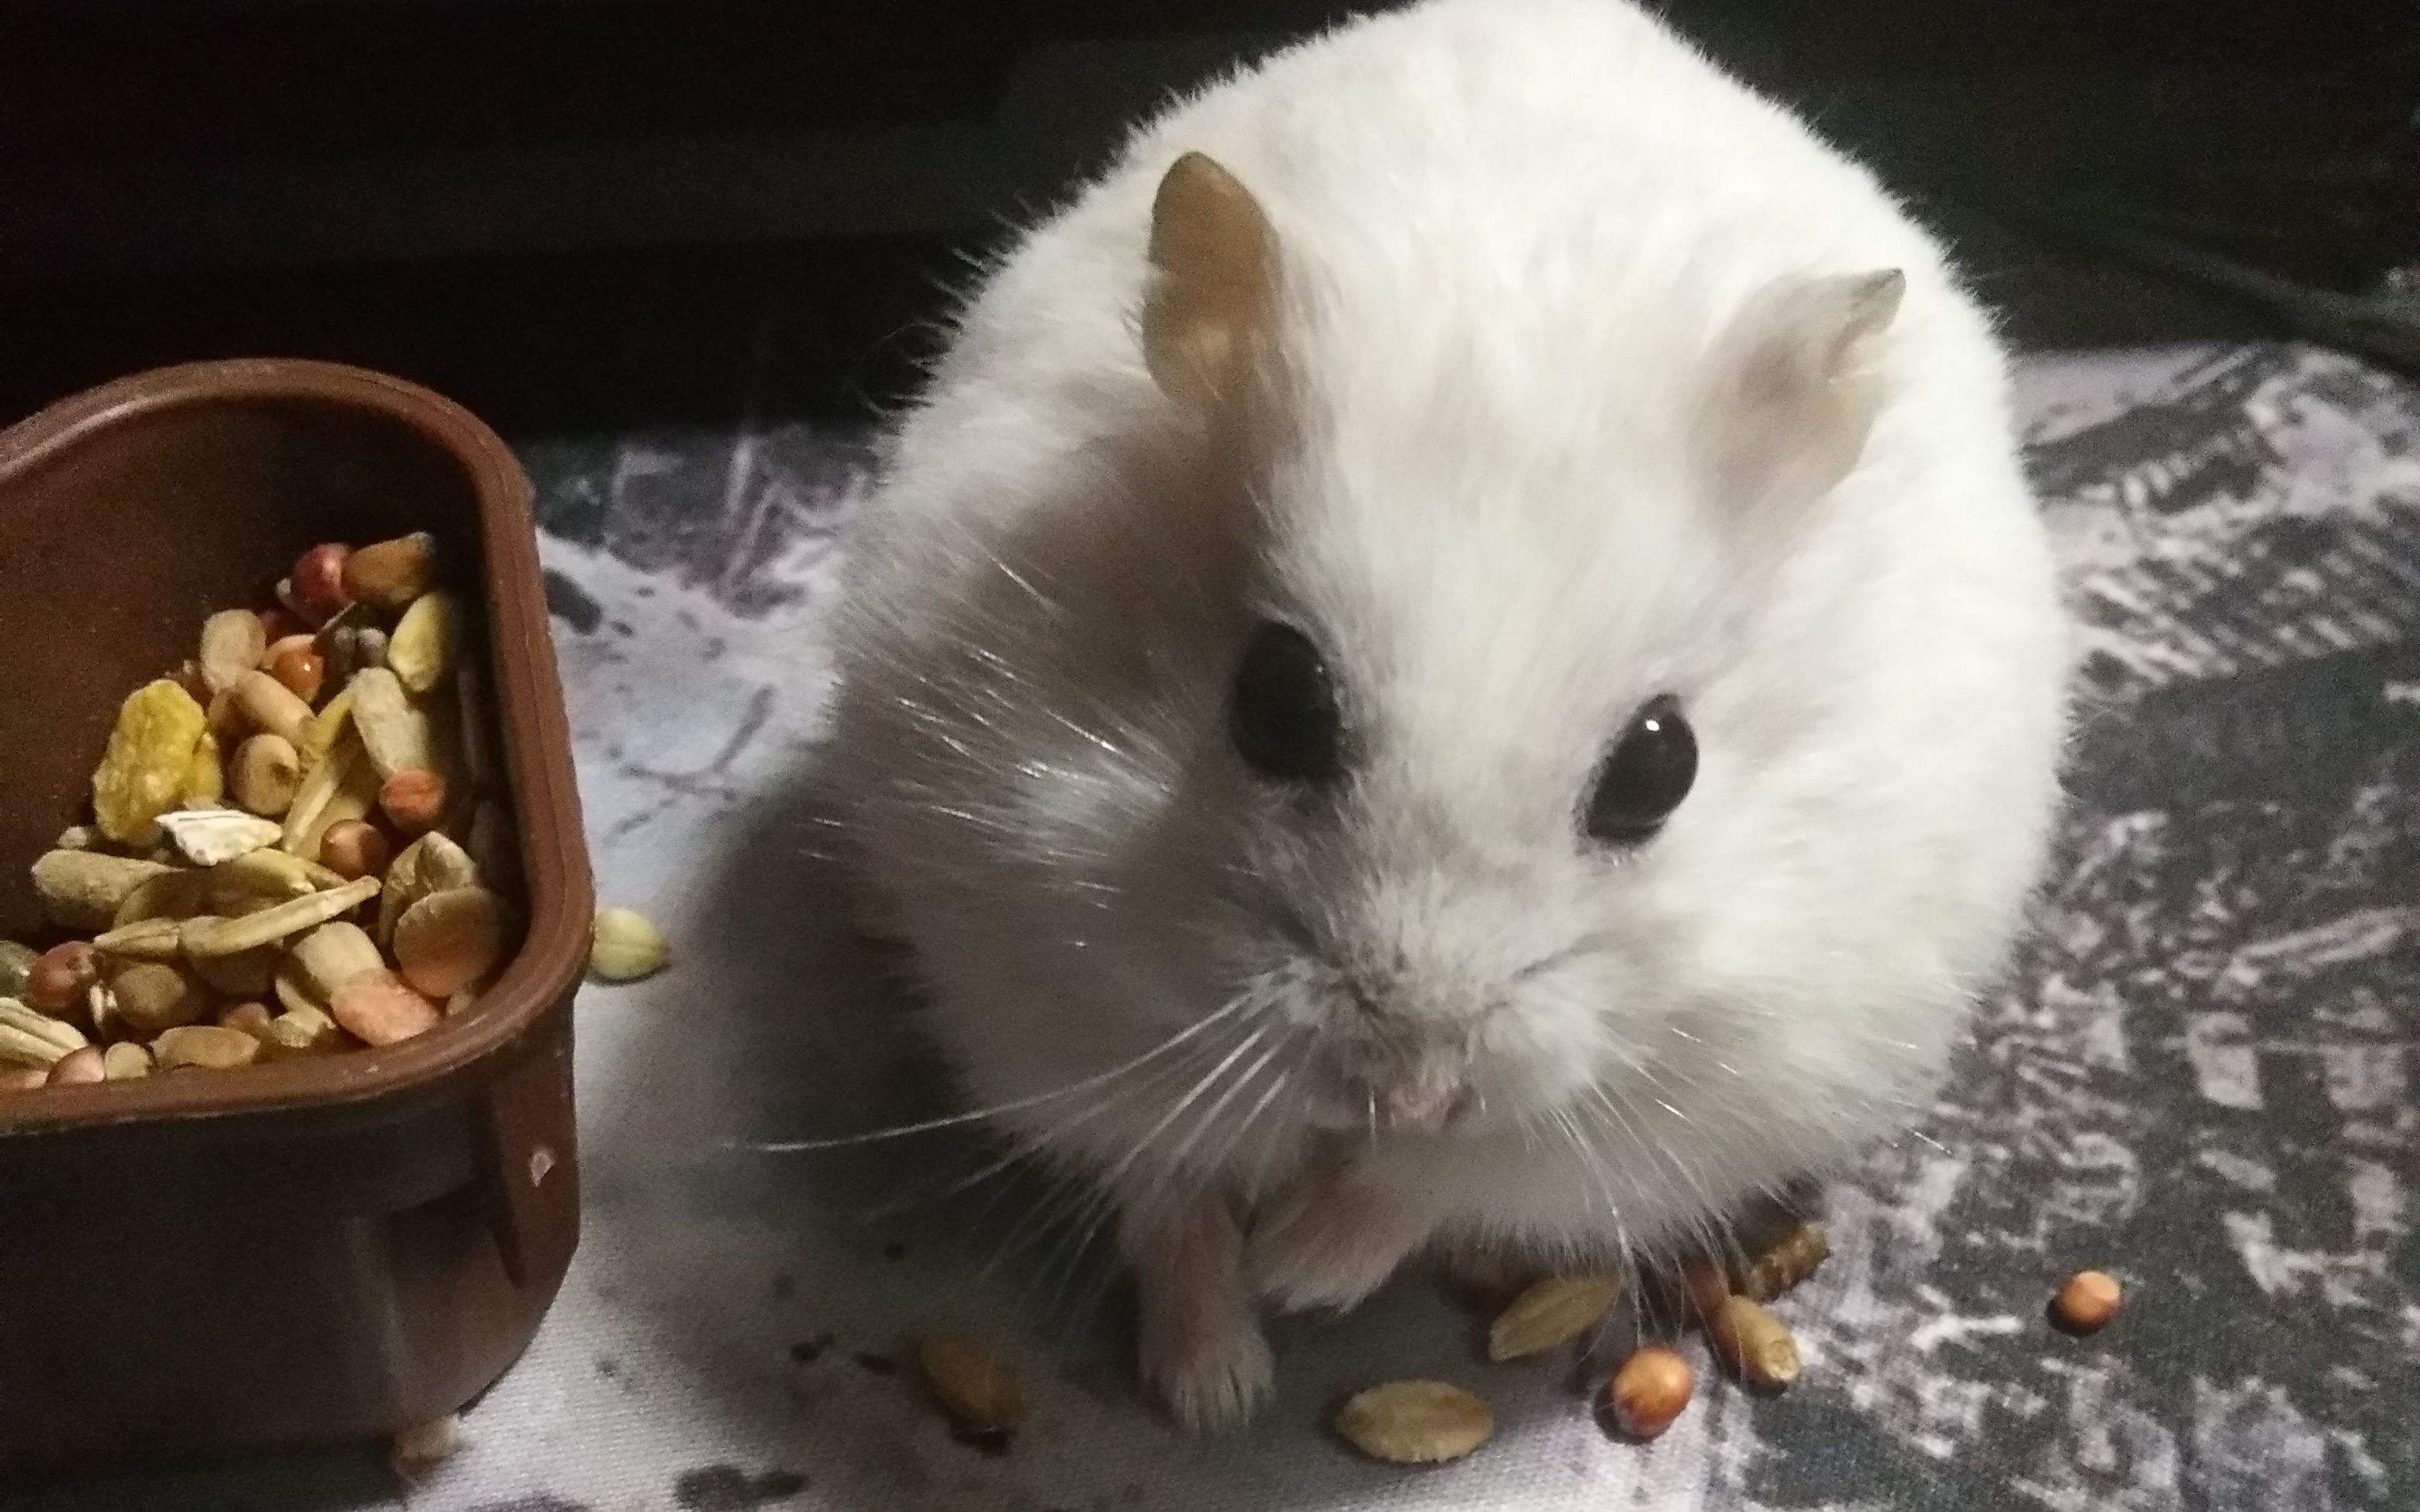 Do hamsters recognize their owners